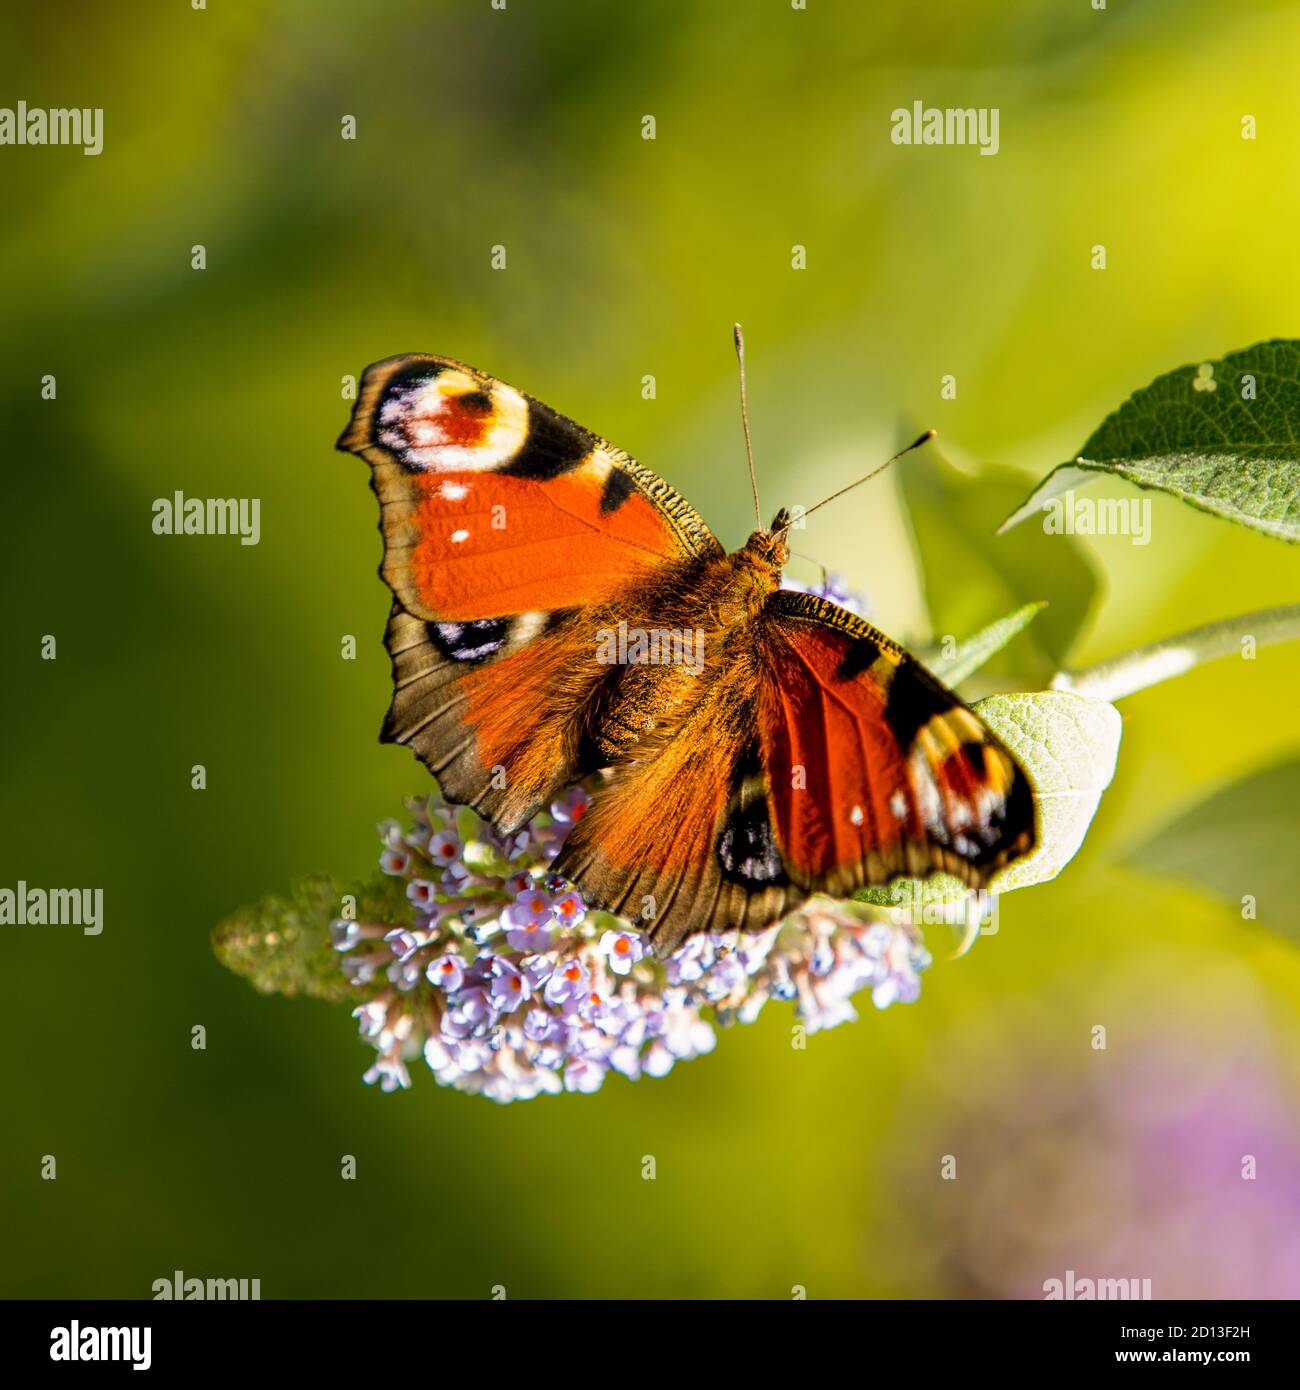 Peacock Butterfly, Aglais io, perched on a purple flower, British Countryside, Bedfordshire, UK Stock Photo